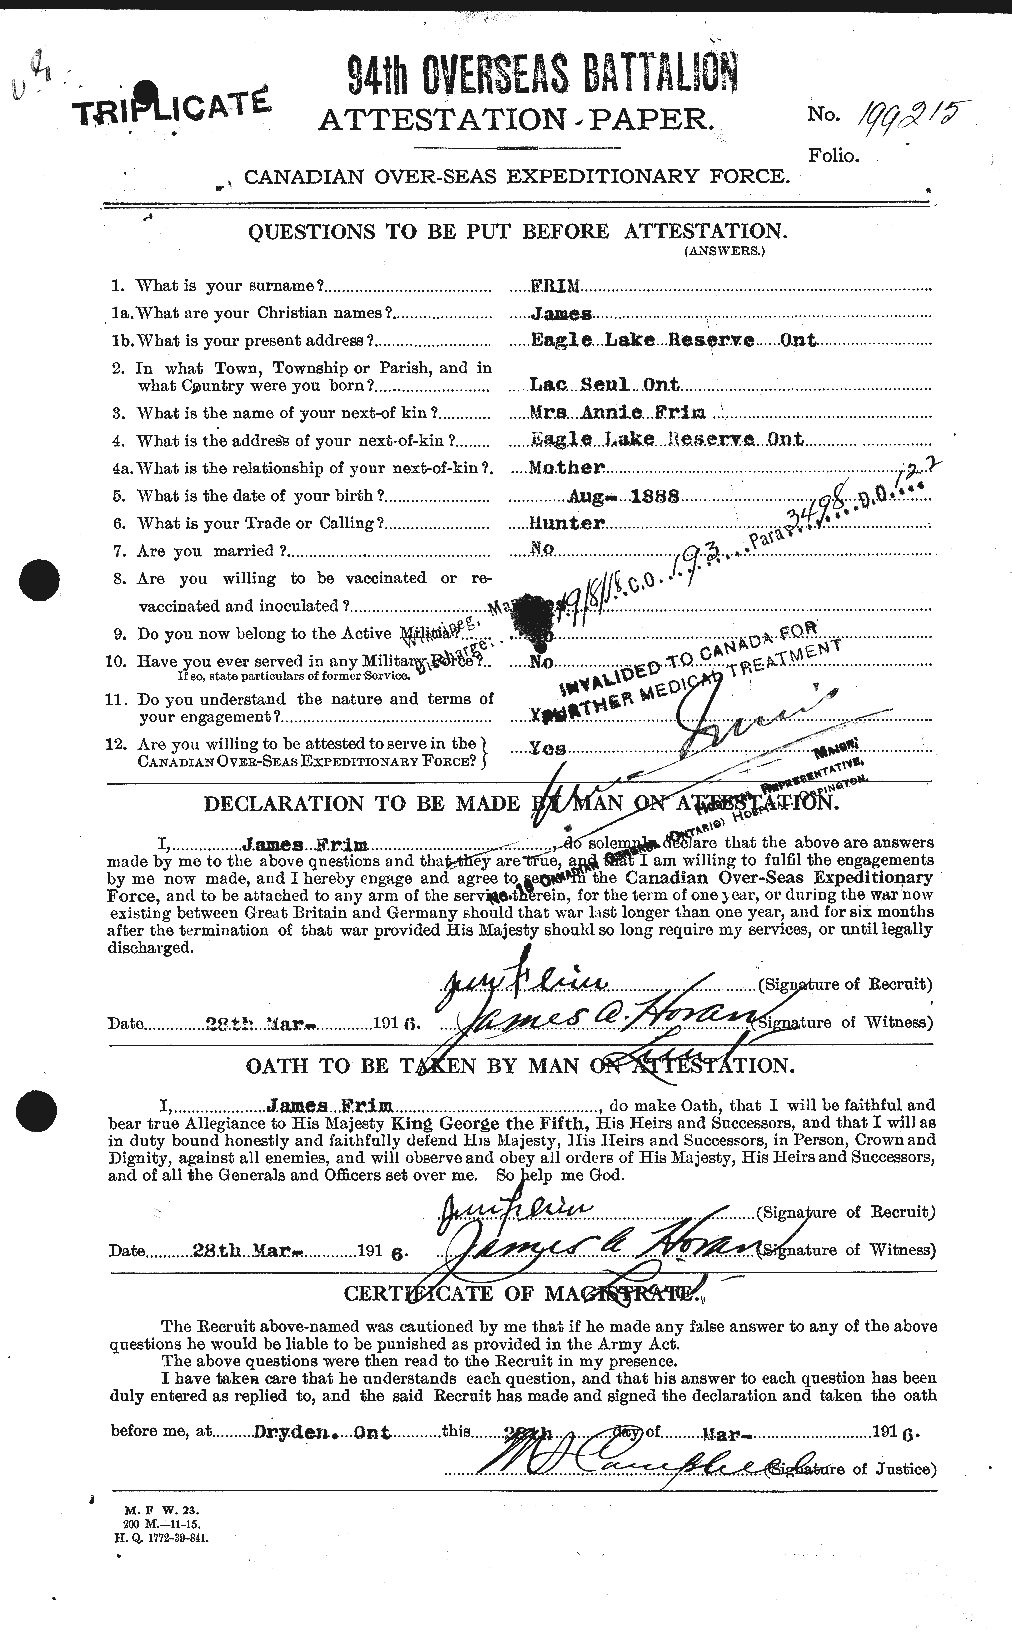 Personnel Records of the First World War - CEF 337430a